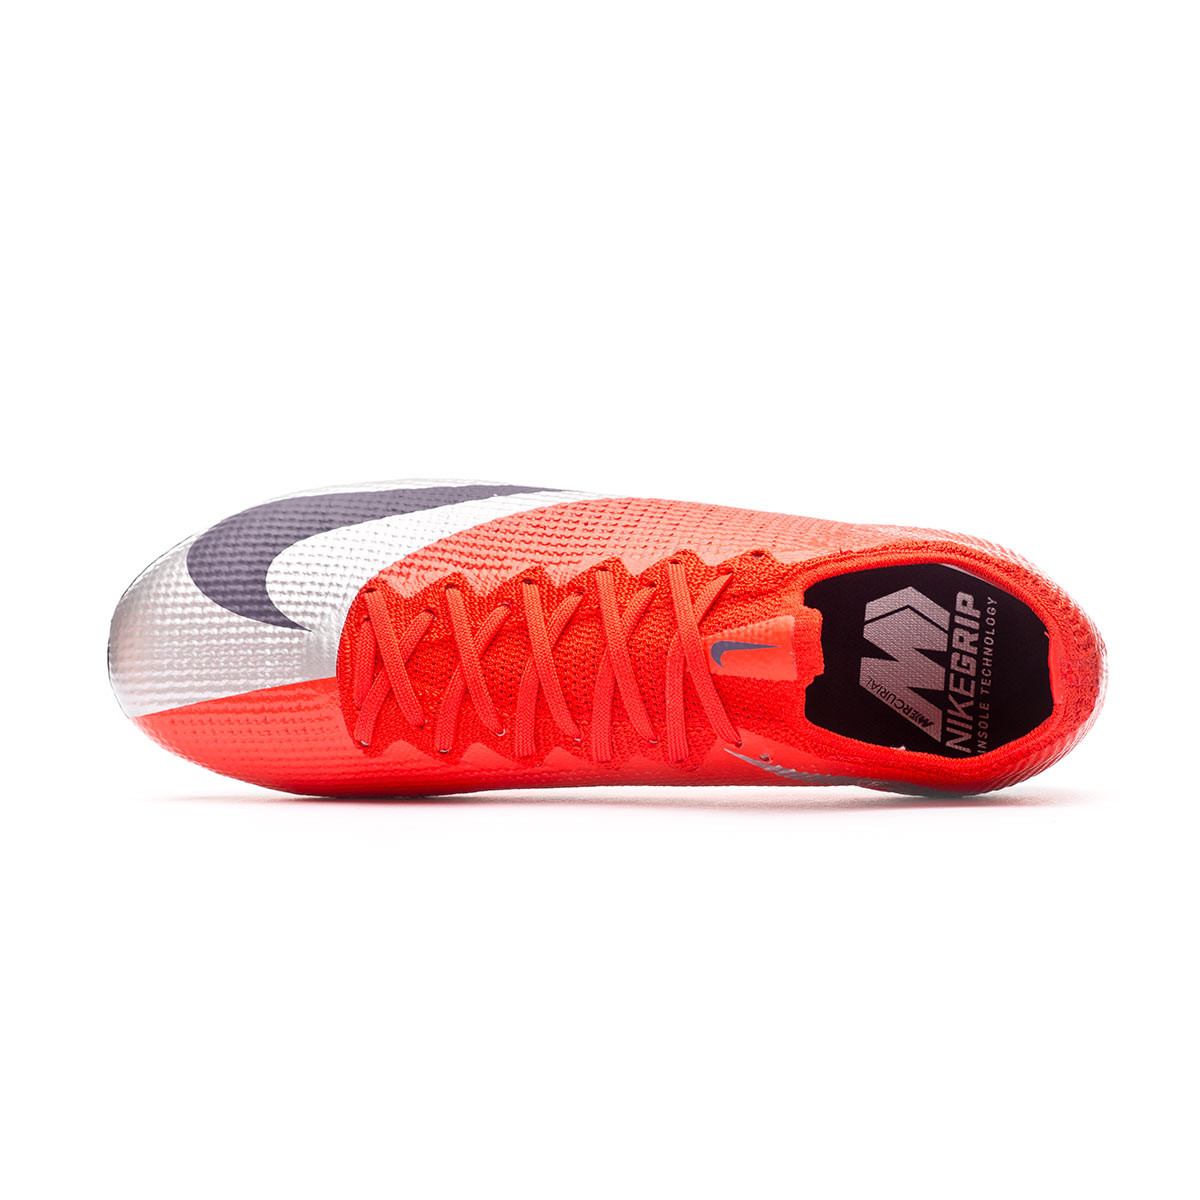  NIKE Official Nike Mercurial Superfly 7 Elite FG Firm.